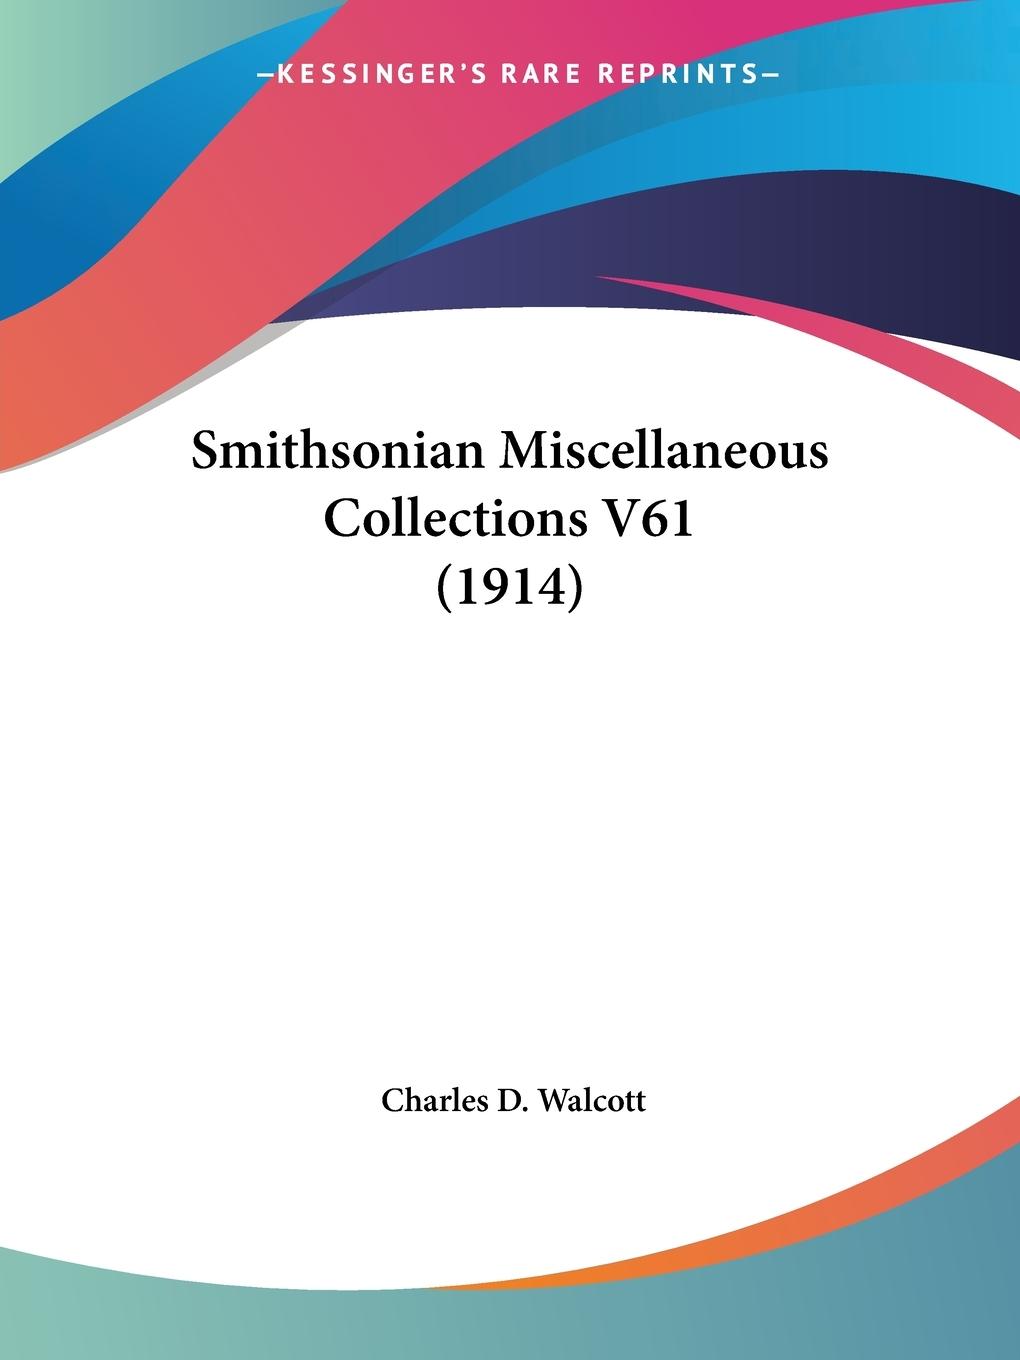 Smithsonian Miscellaneous Collections V61 (1914)